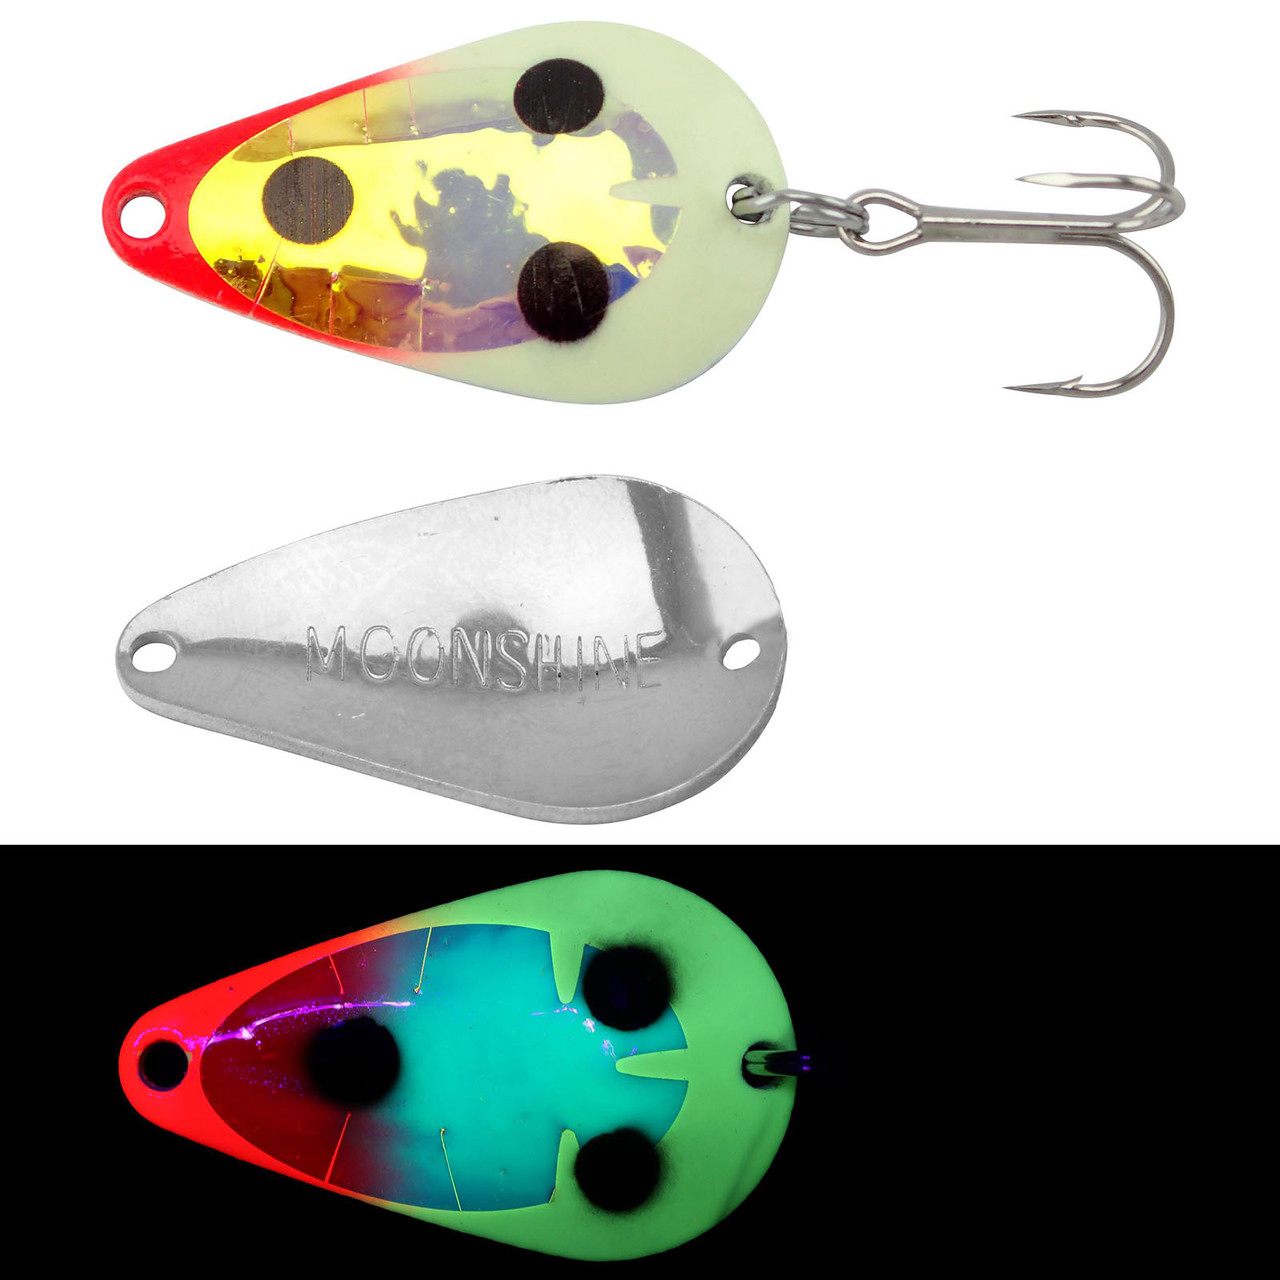 Moonshine Lures RV Casting Spoon - Bloody Nose Glow